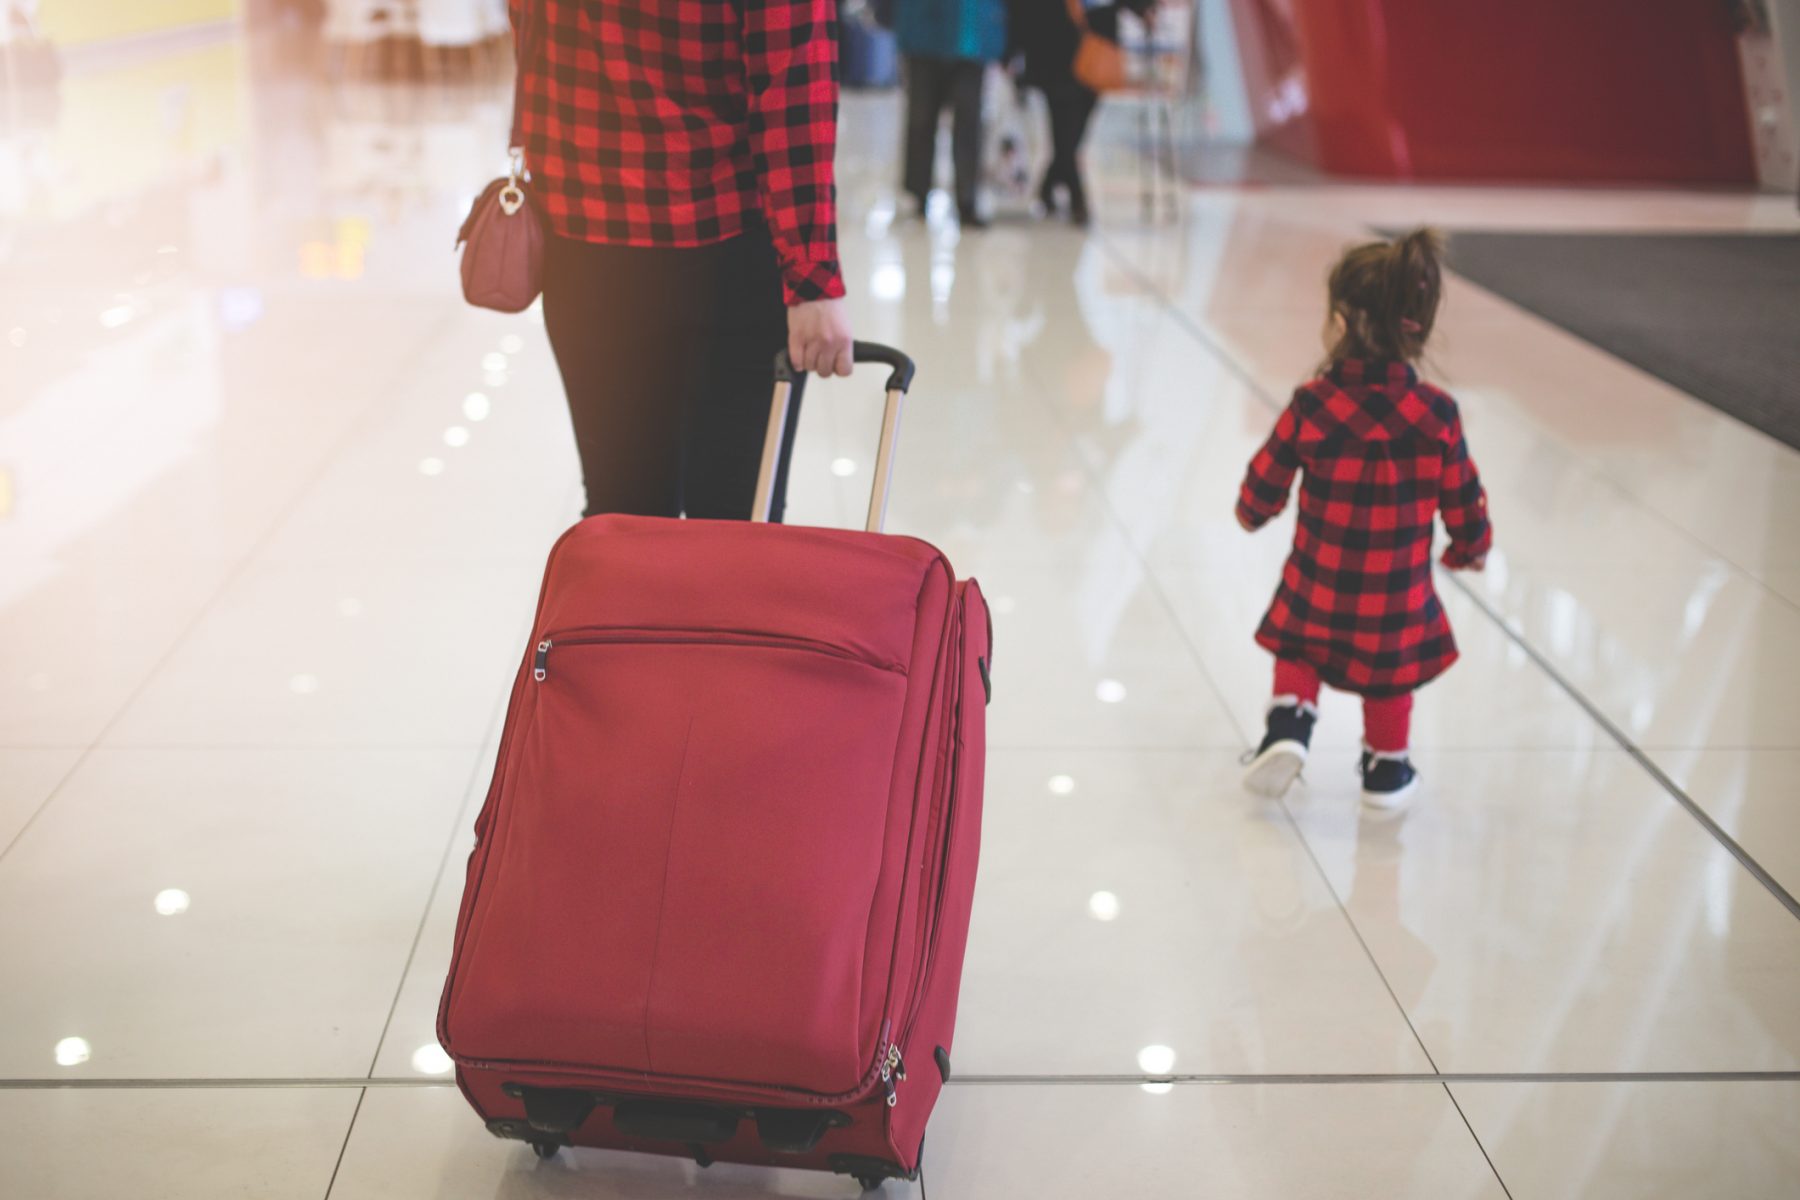 single parent travel for work